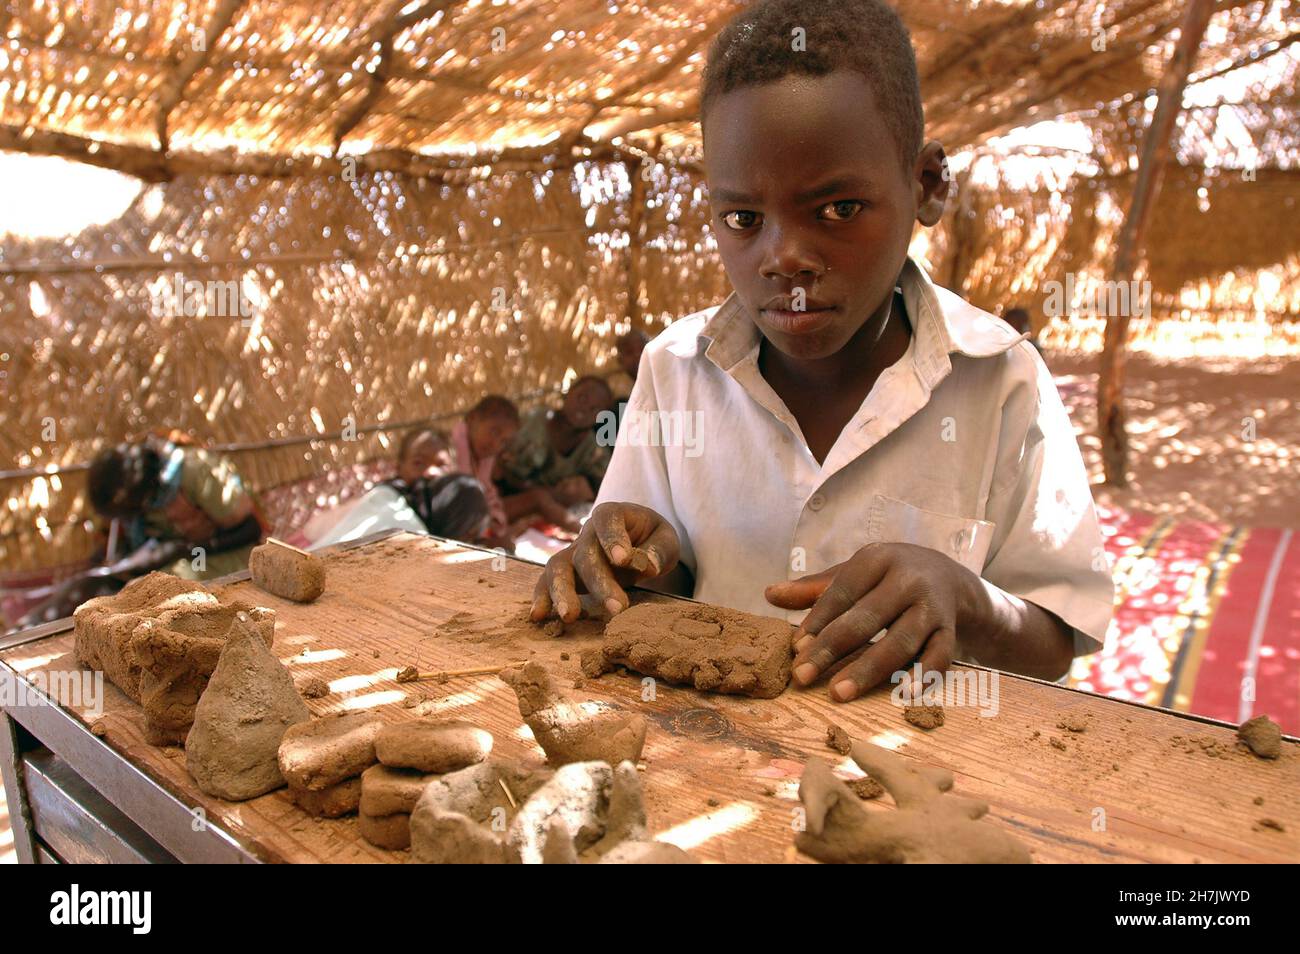 A young boy makes clay toys in a UNICEF supported Safe Play Center in Kalma IDP Camp (Internally Displaced Person) 14 km East of Nyala, South Darfur. Stock Photo